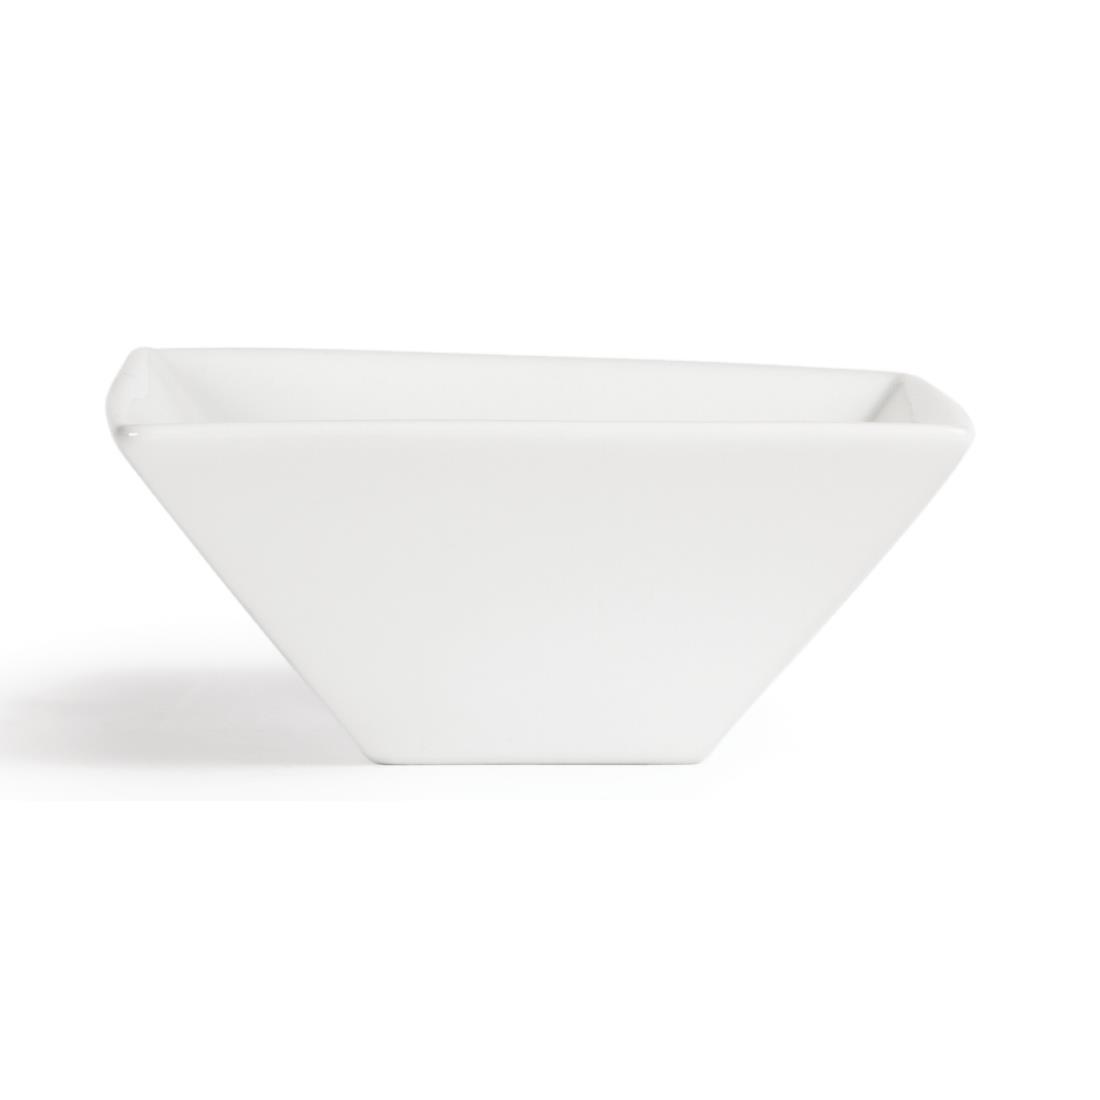 Olympia Whiteware Square Bowls 170mm (Pack of 12) - U829  - 3